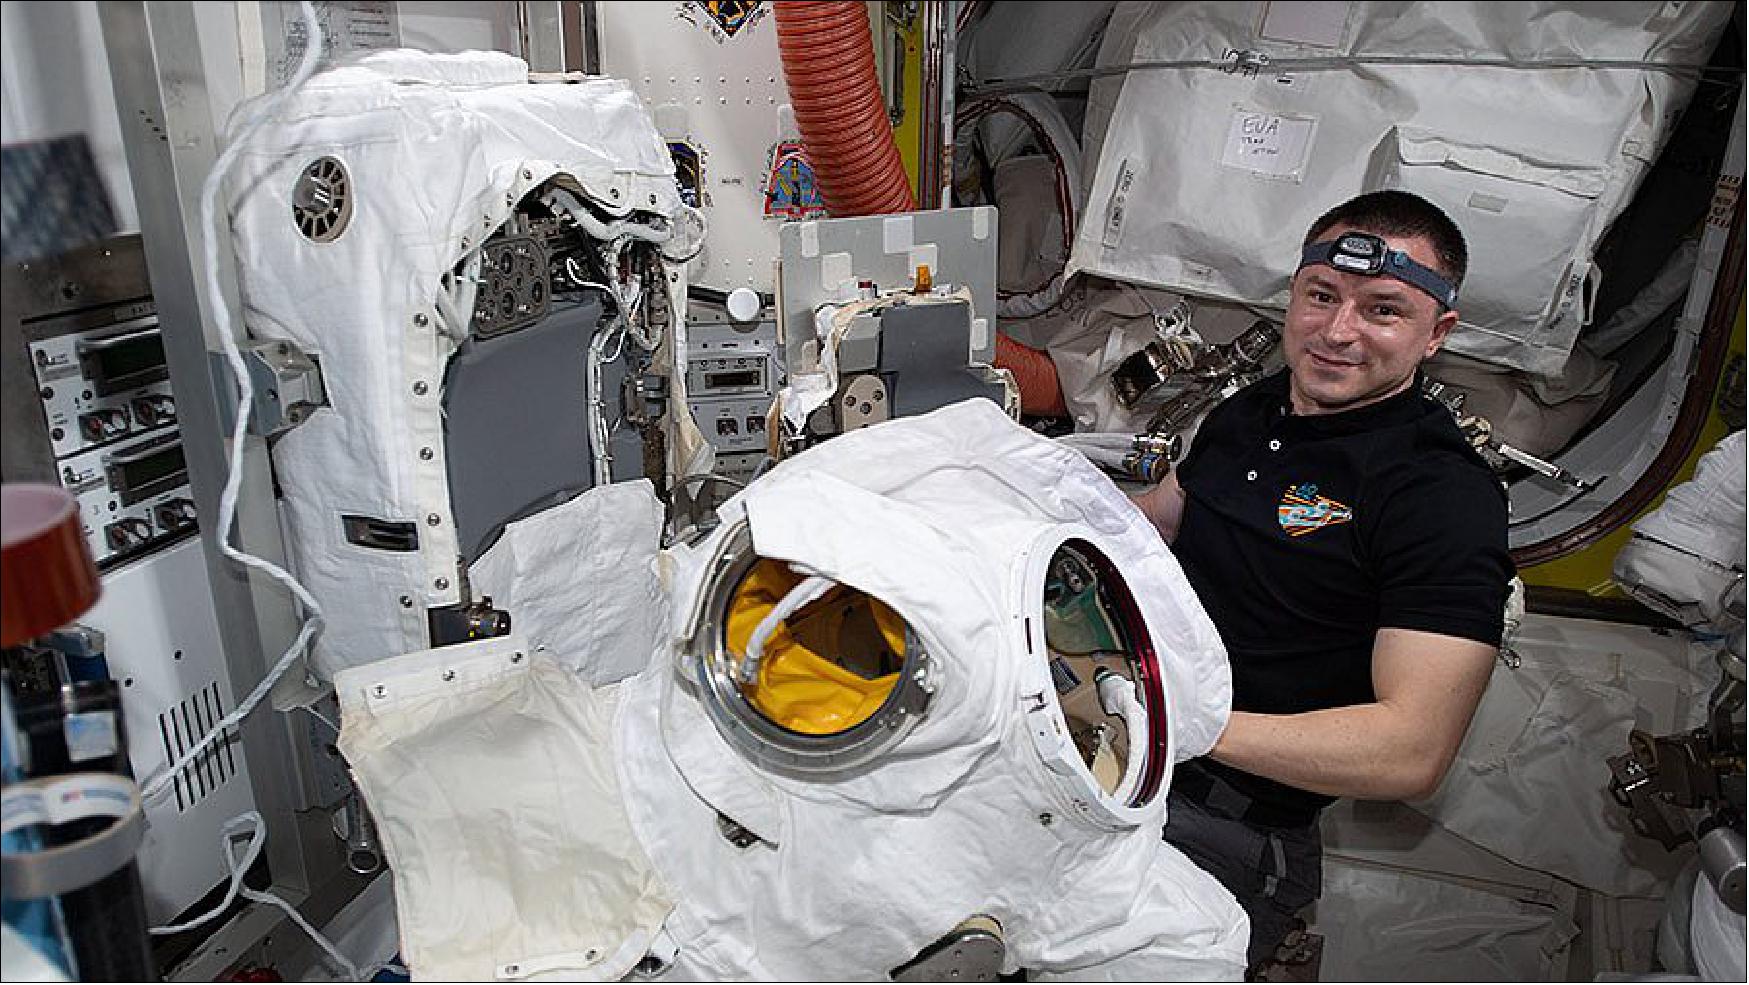 Figure 4: Expedition 62 Flight Engineer Andrew Morgan works on U.S. spacesuit components inside the Quest airlock (image credit: NASA)